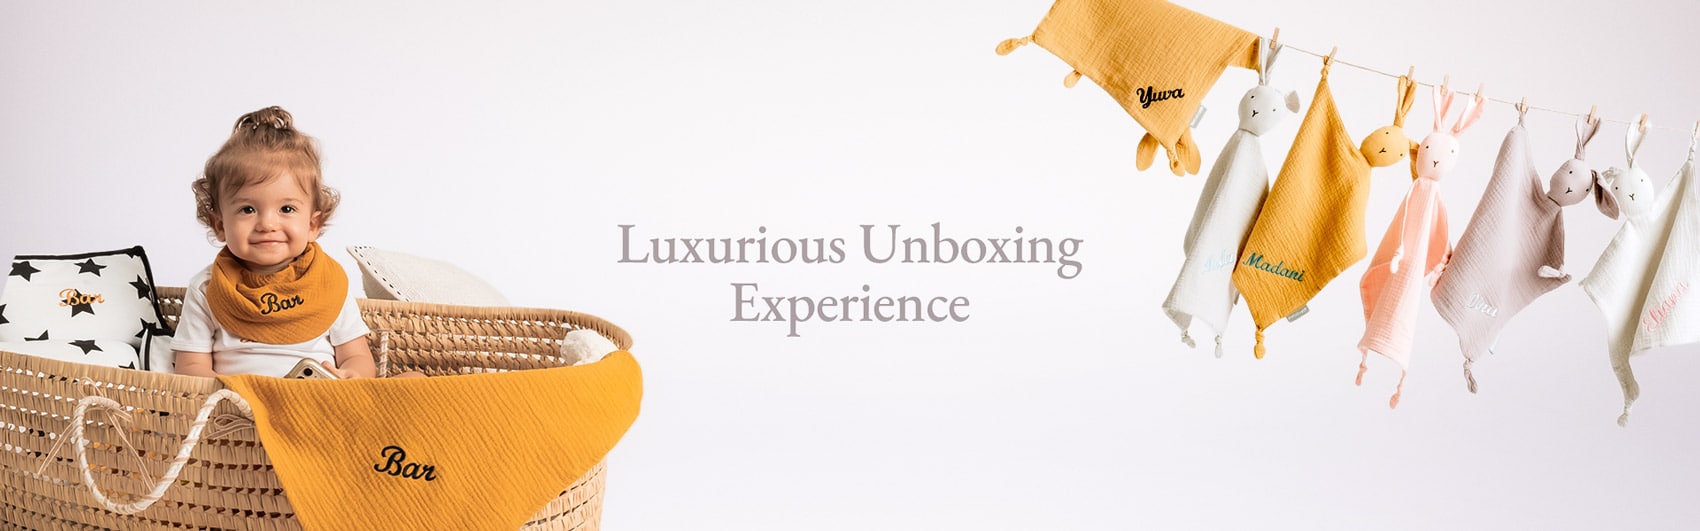 newborn baby gift luxury unboxing experience